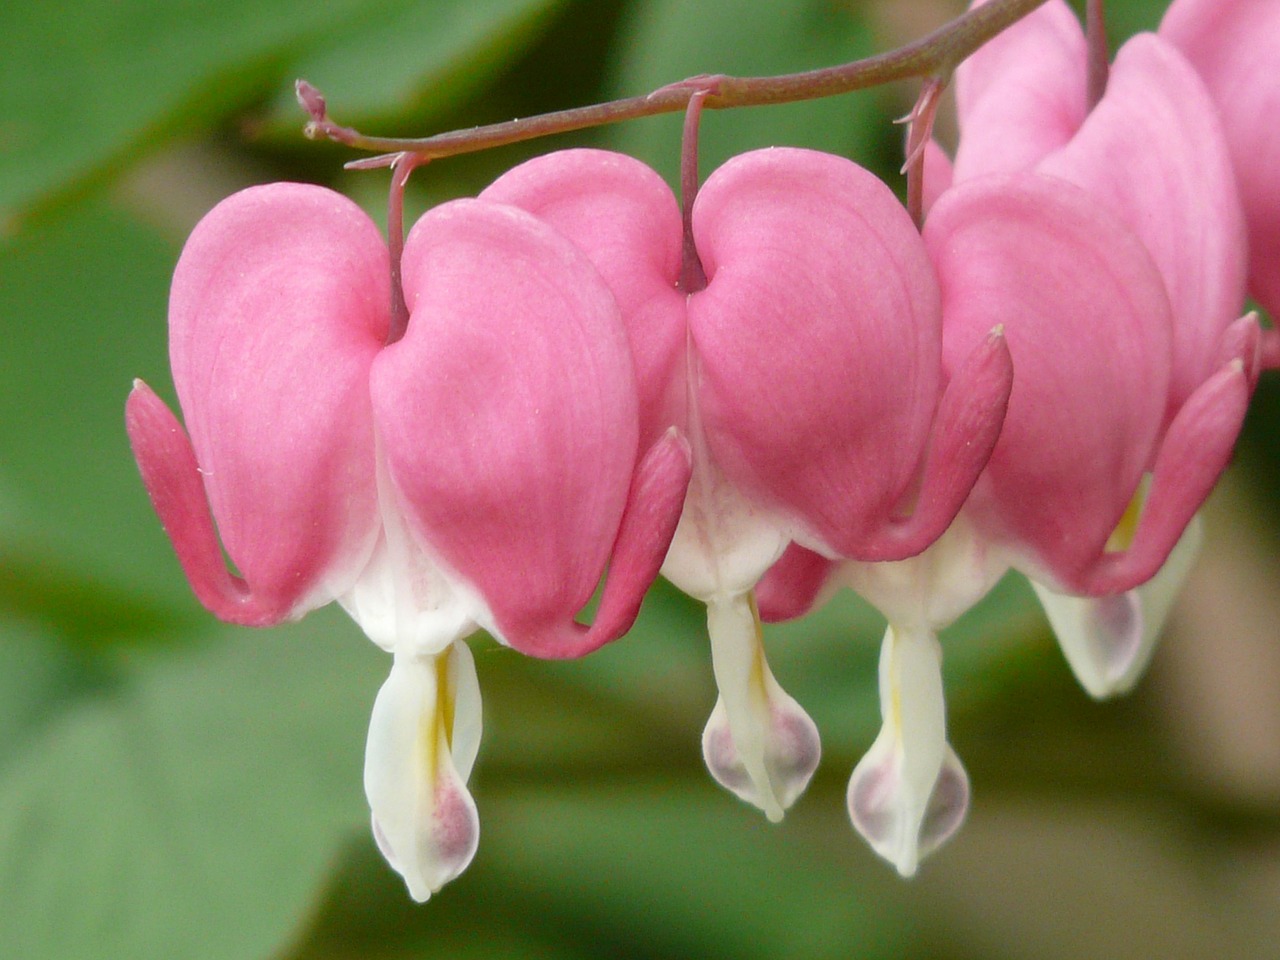 bleeding heart,ornamental plant,flower,plant,blossom,bloom,bloom,pink,free pictures, free photos, free images, royalty free, free illustrations, public domain